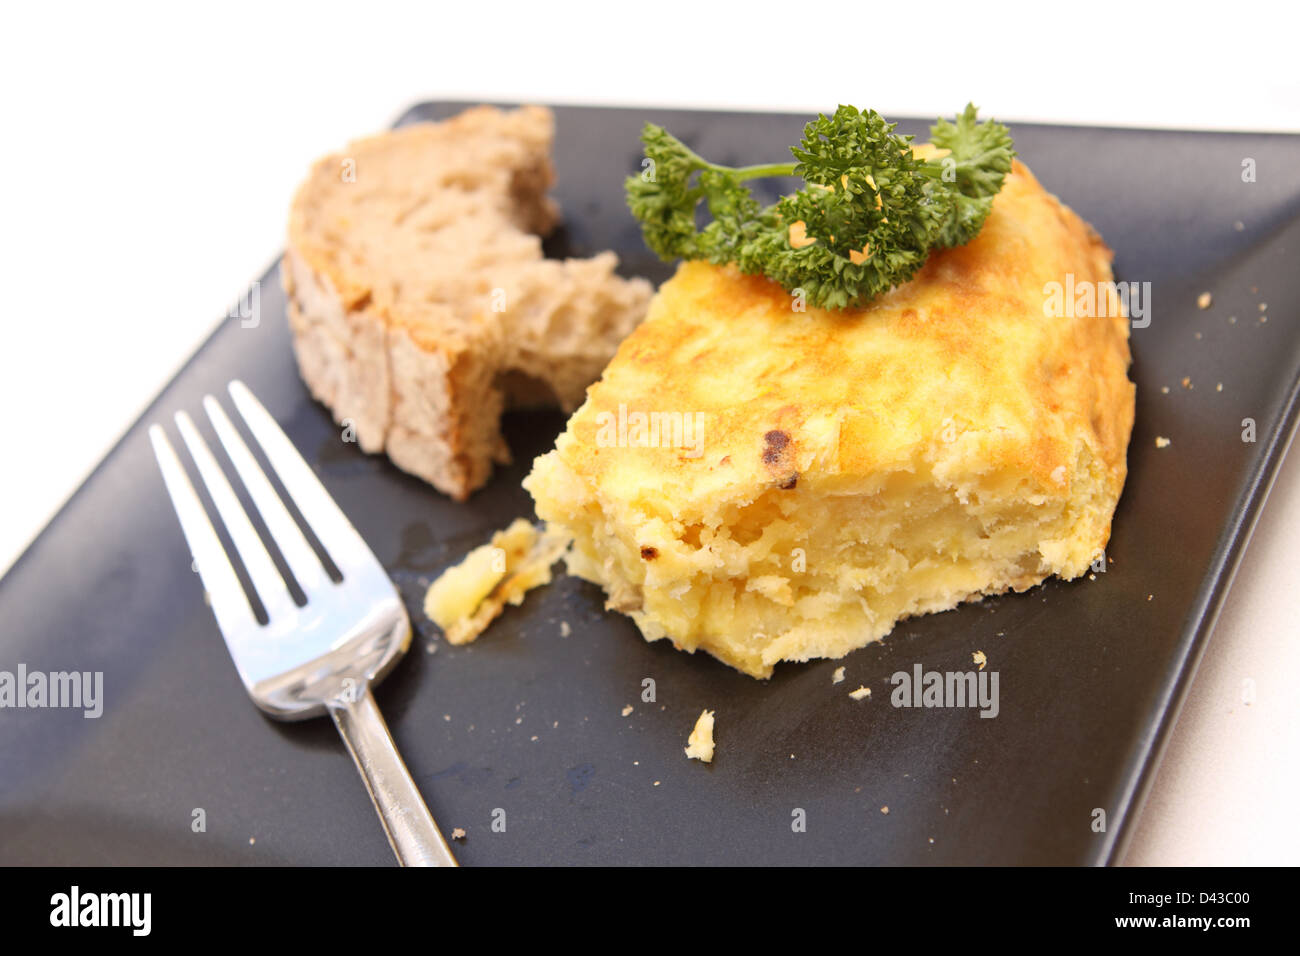 Spain Spanish Omelette made of potato and egg and onion served with parsley and bread Madrid Spain Stock Photo